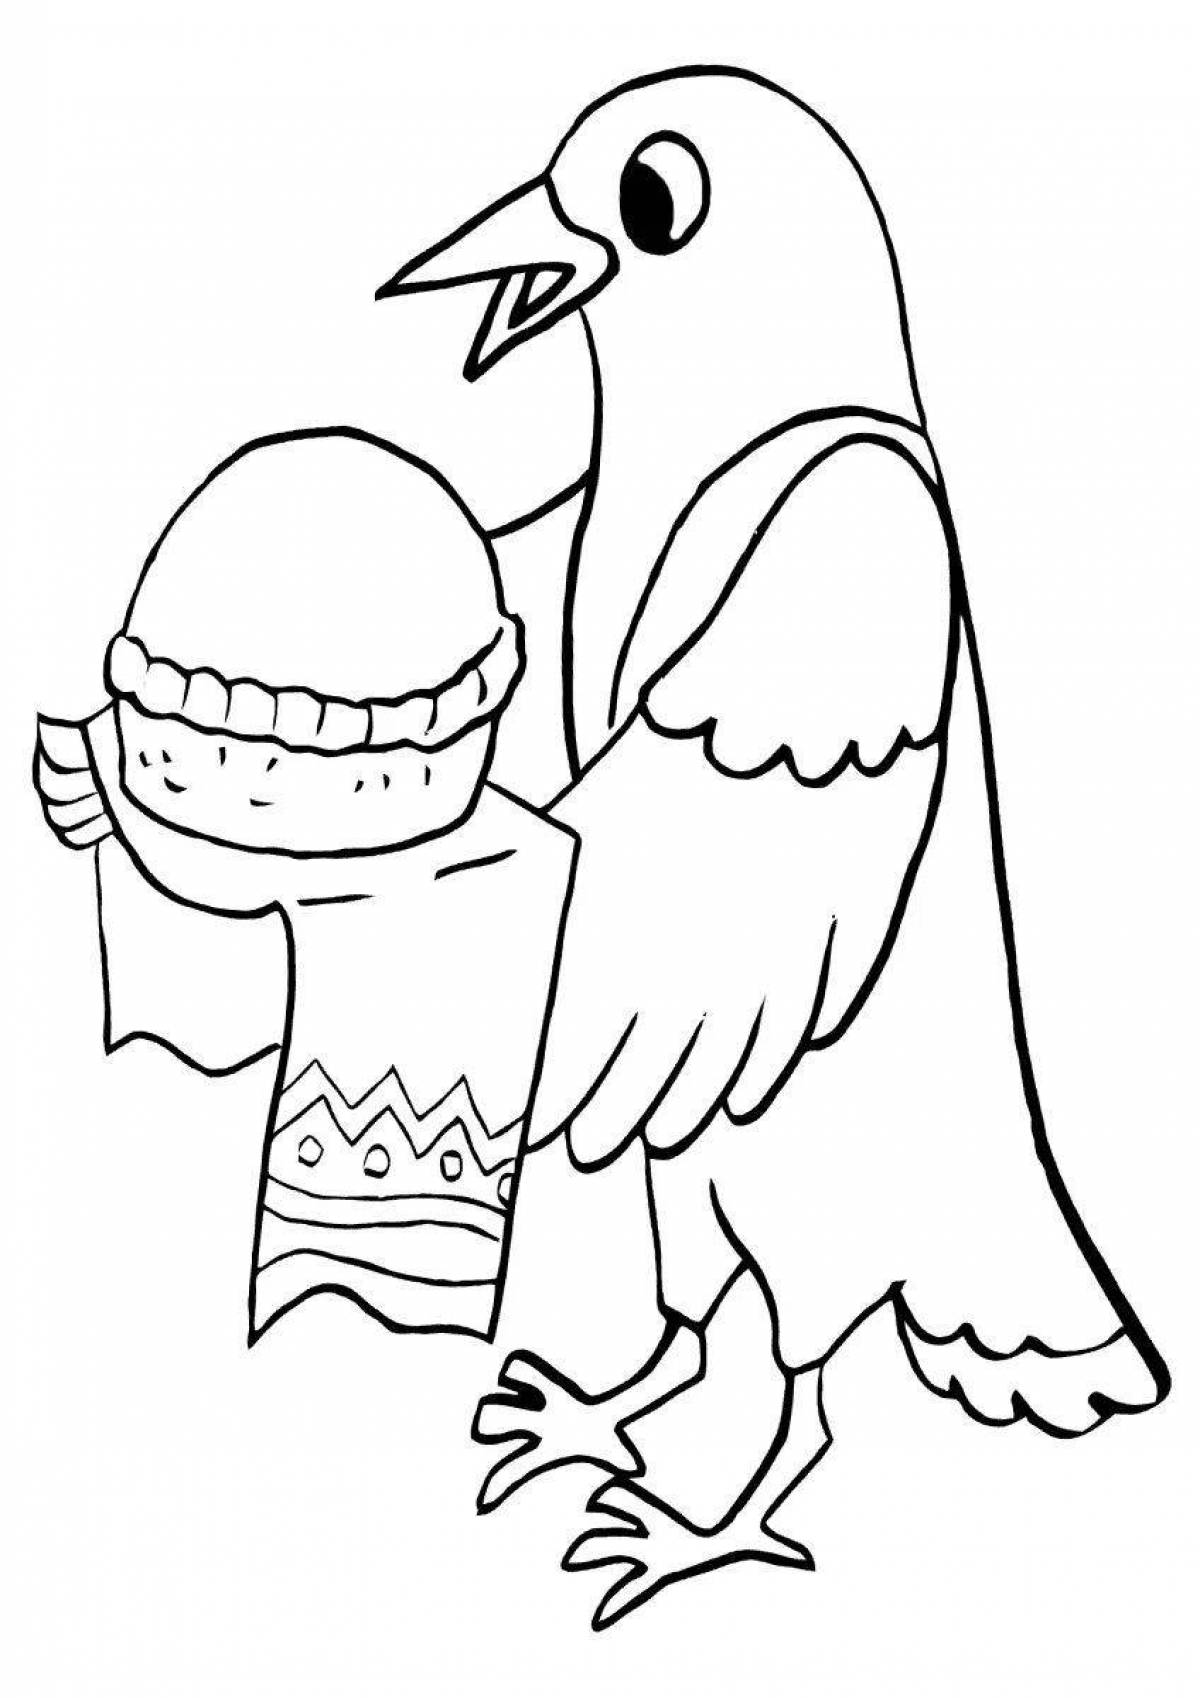 Loaf coloring page color